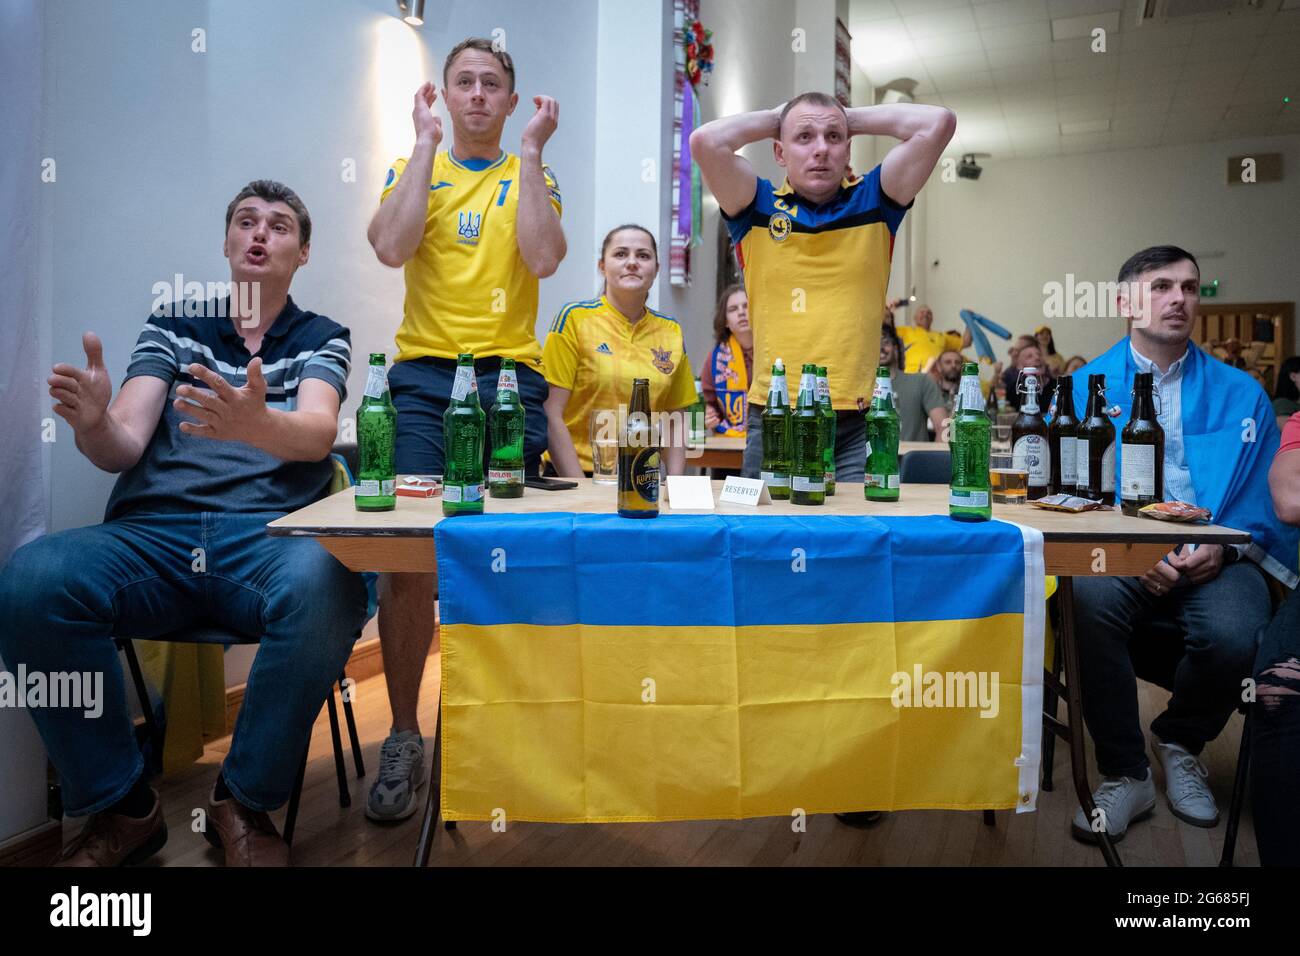 London, UK. 3rd July, 2021. UEFA EURO 2020: Ukraine vs England. British-Ukrainians show support for their home team at the Association of Ukrainians in Great Britain venue (AUGB) in Holland Park. Credit: Guy Corbishley/Alamy Live News Stock Photo